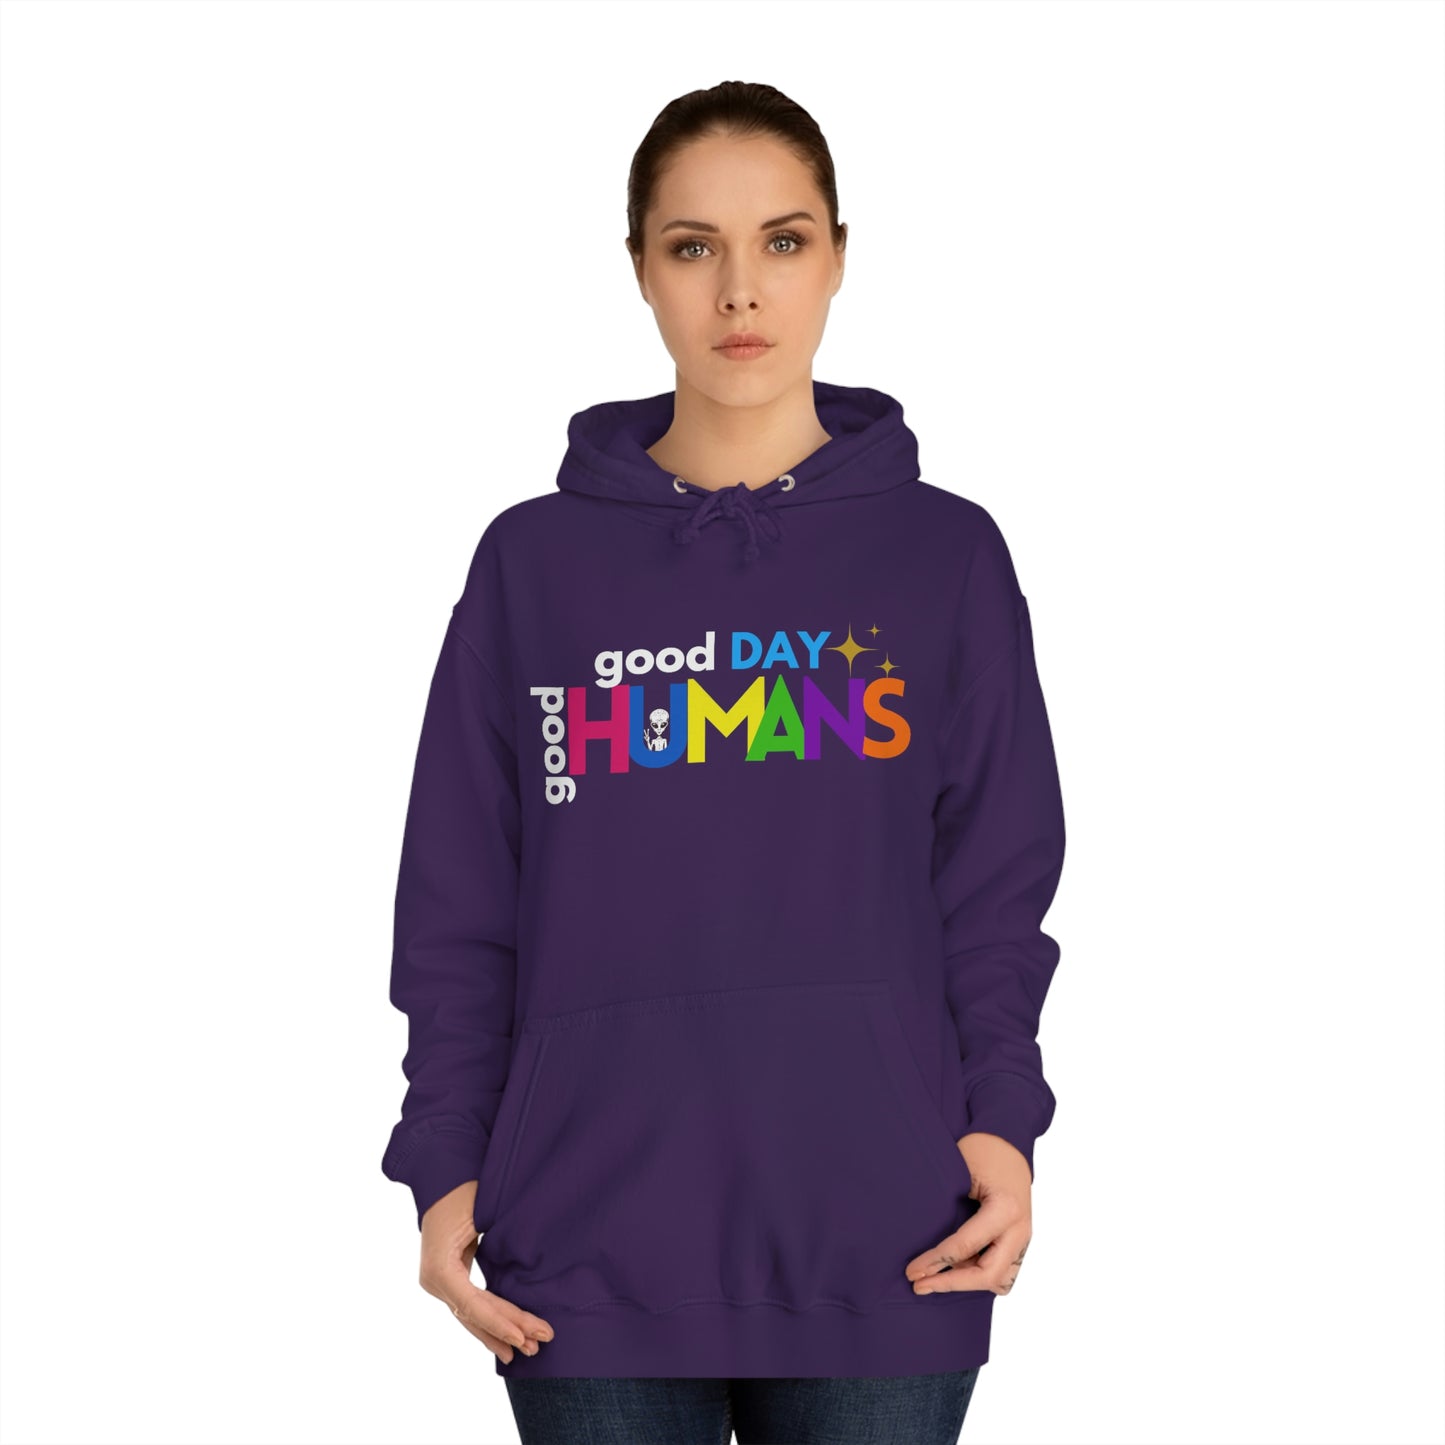 "Good Day Good Humans" College Hoodie